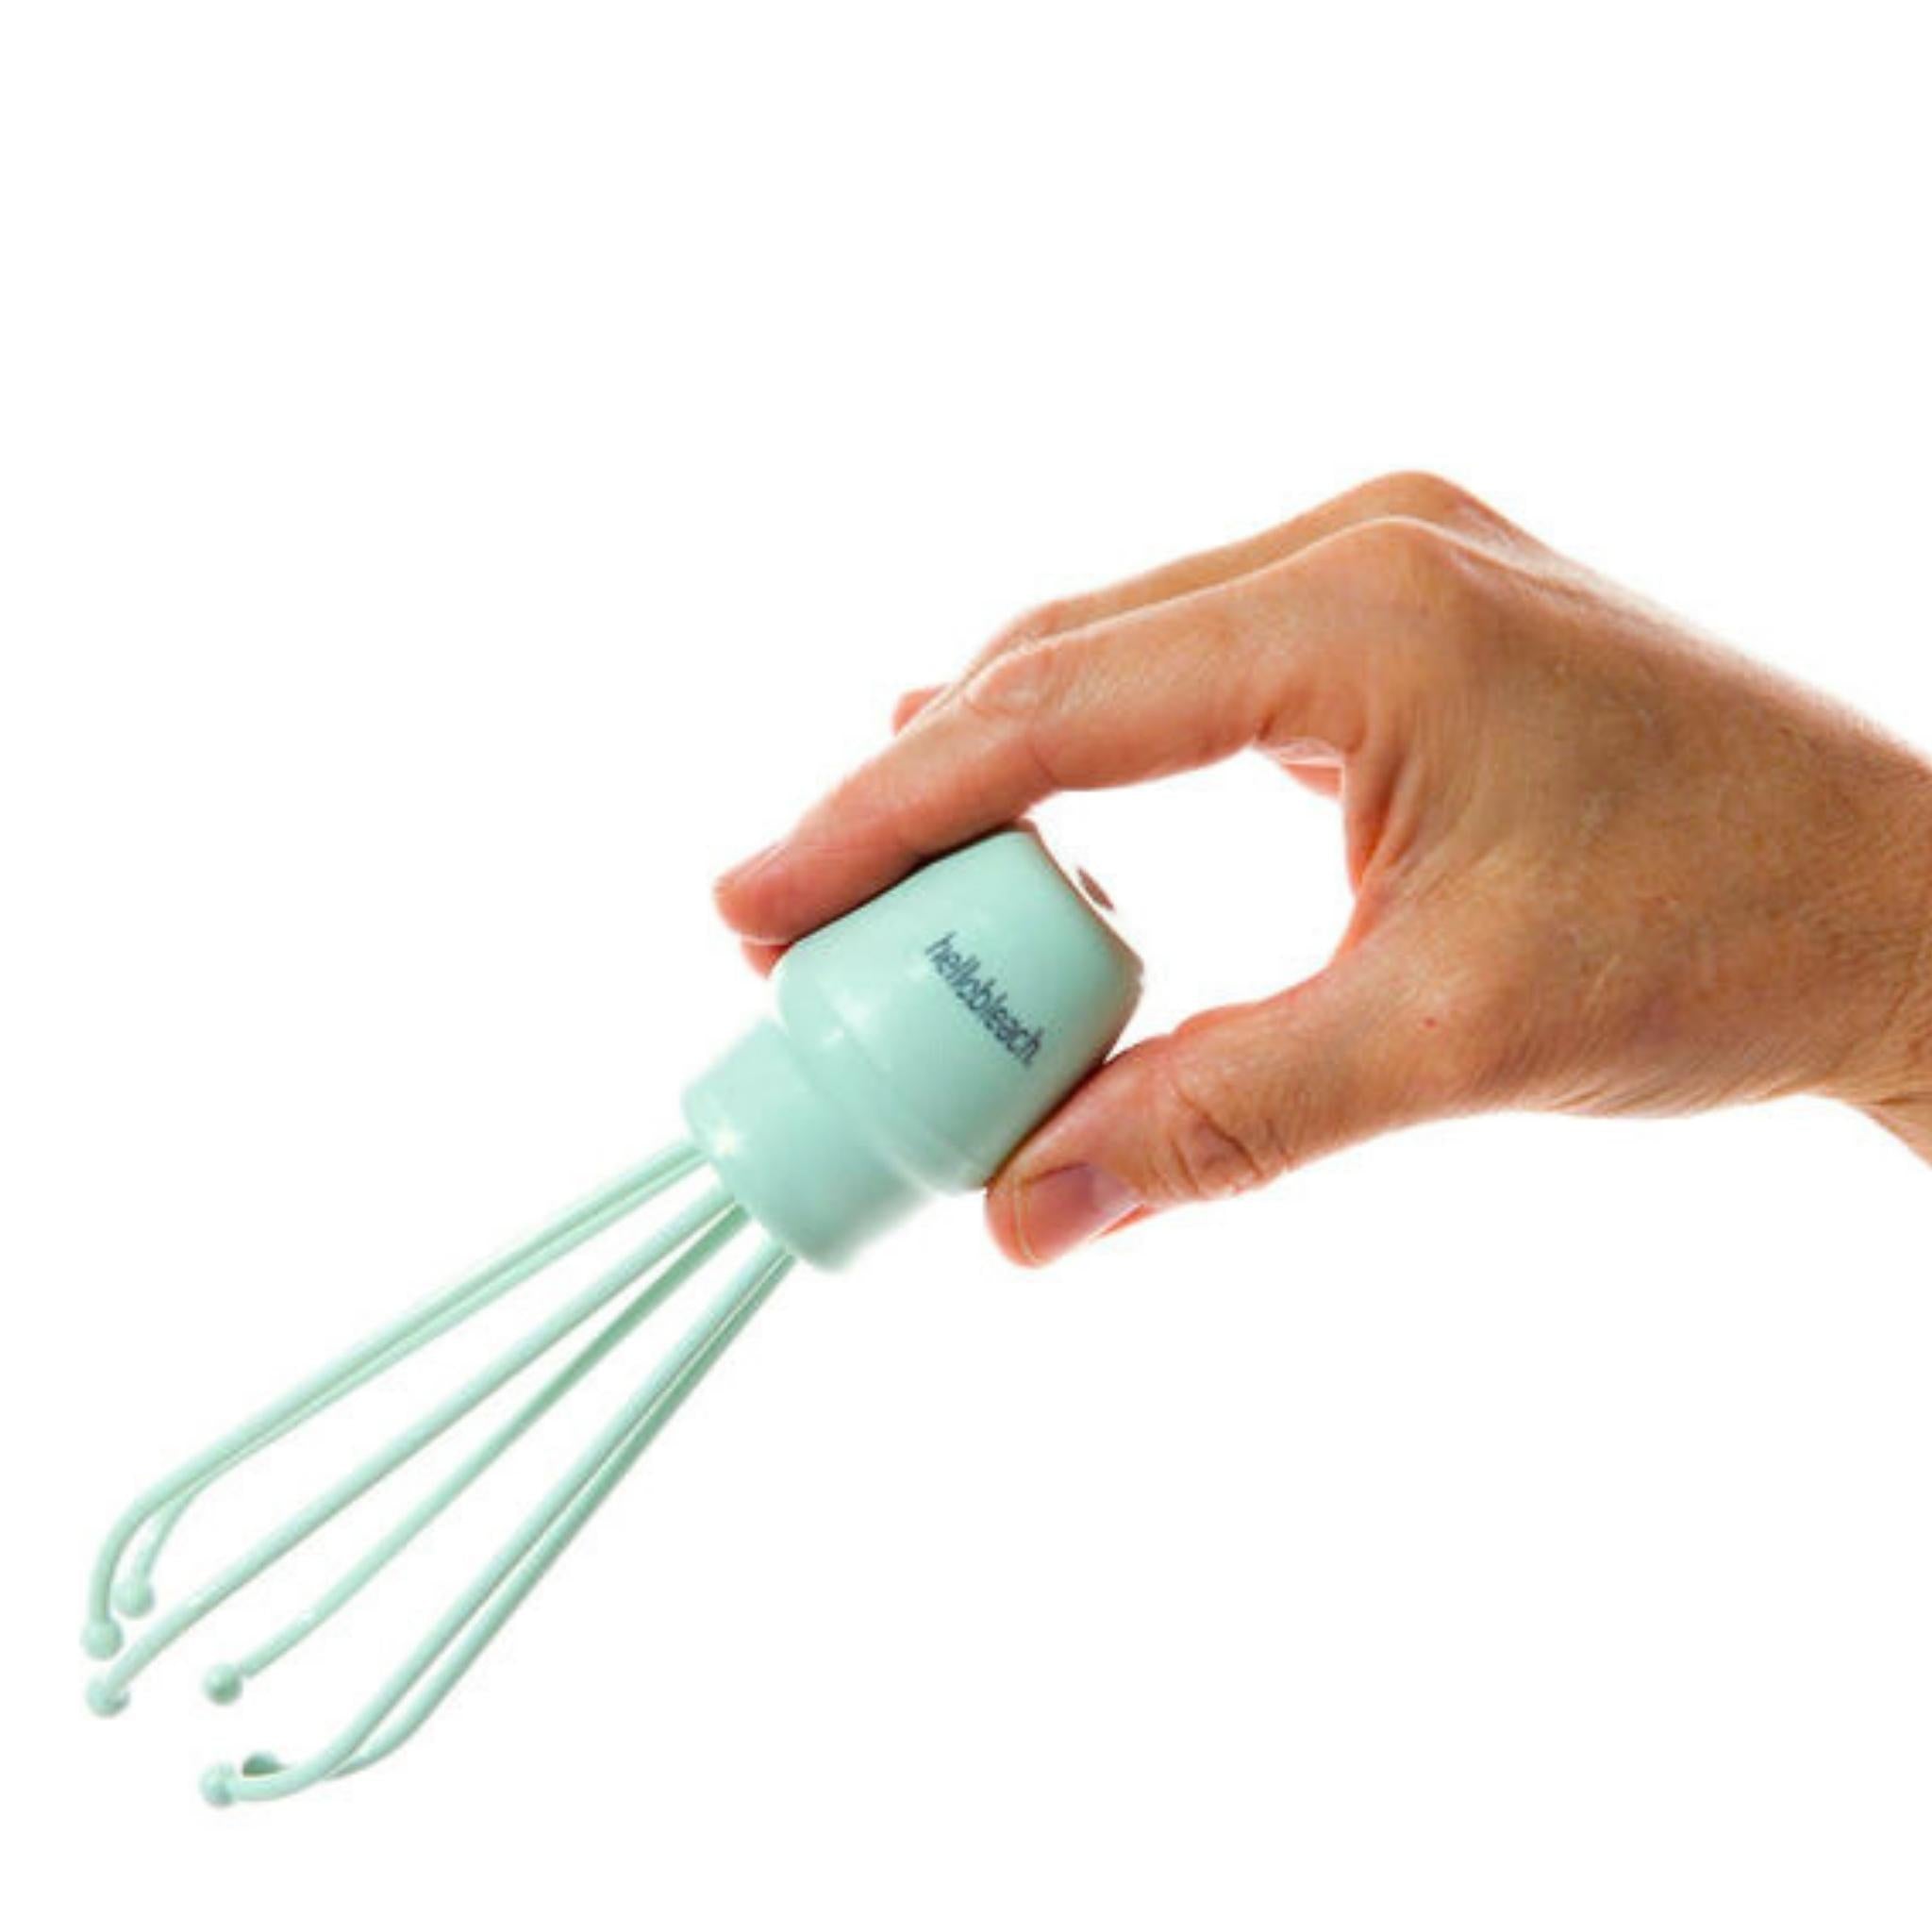 TINT WHISK MADE FROM RECYCLED PLASTICS